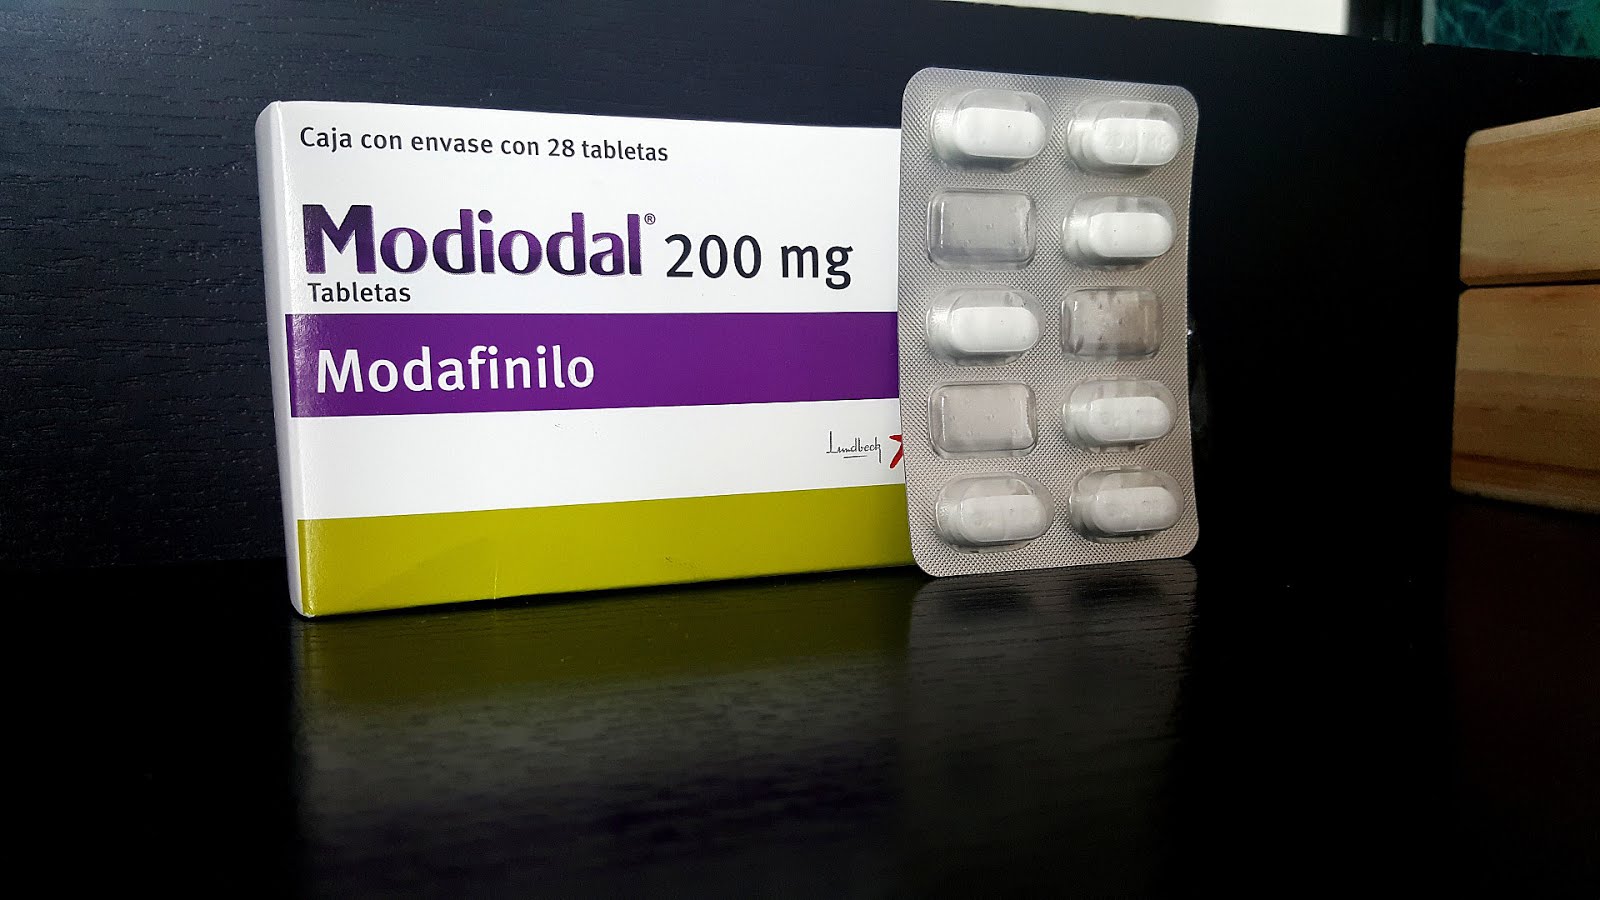 Provigil For ADHD: Can Modafinil Help Handle Attention-Deficit Hyperactivity Disorder?